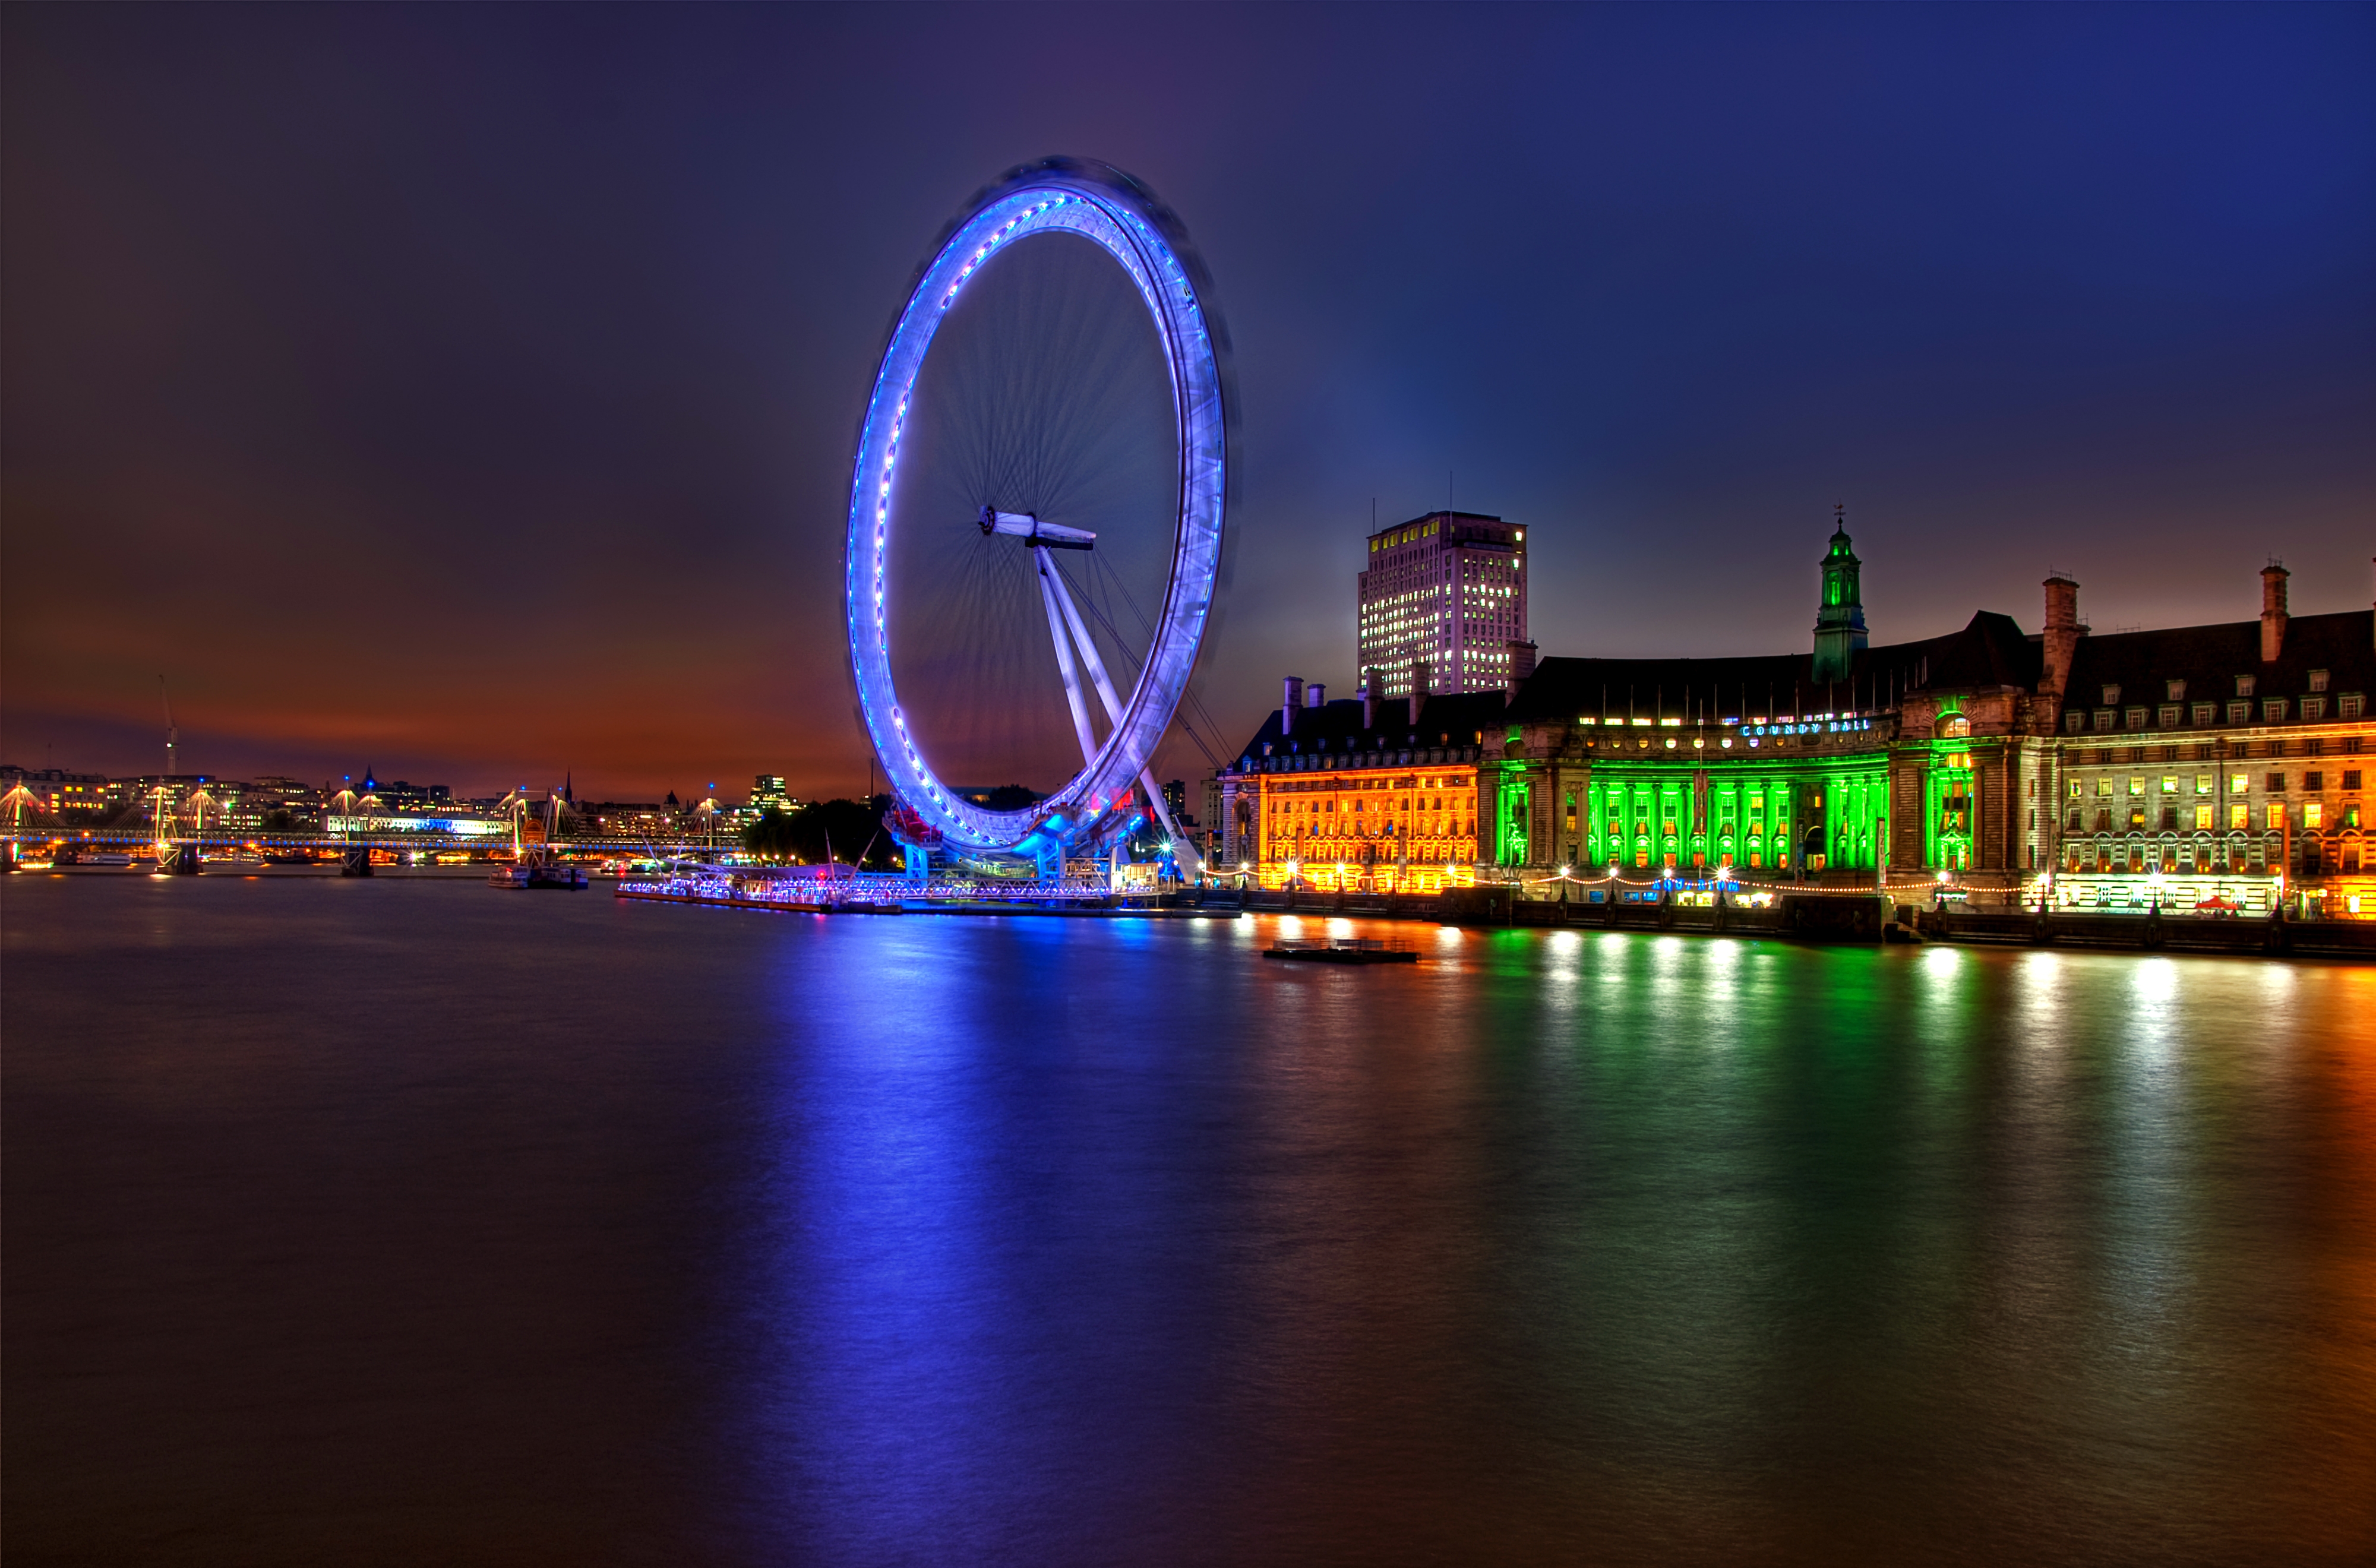 illumination, thames, great britain, evening download for free